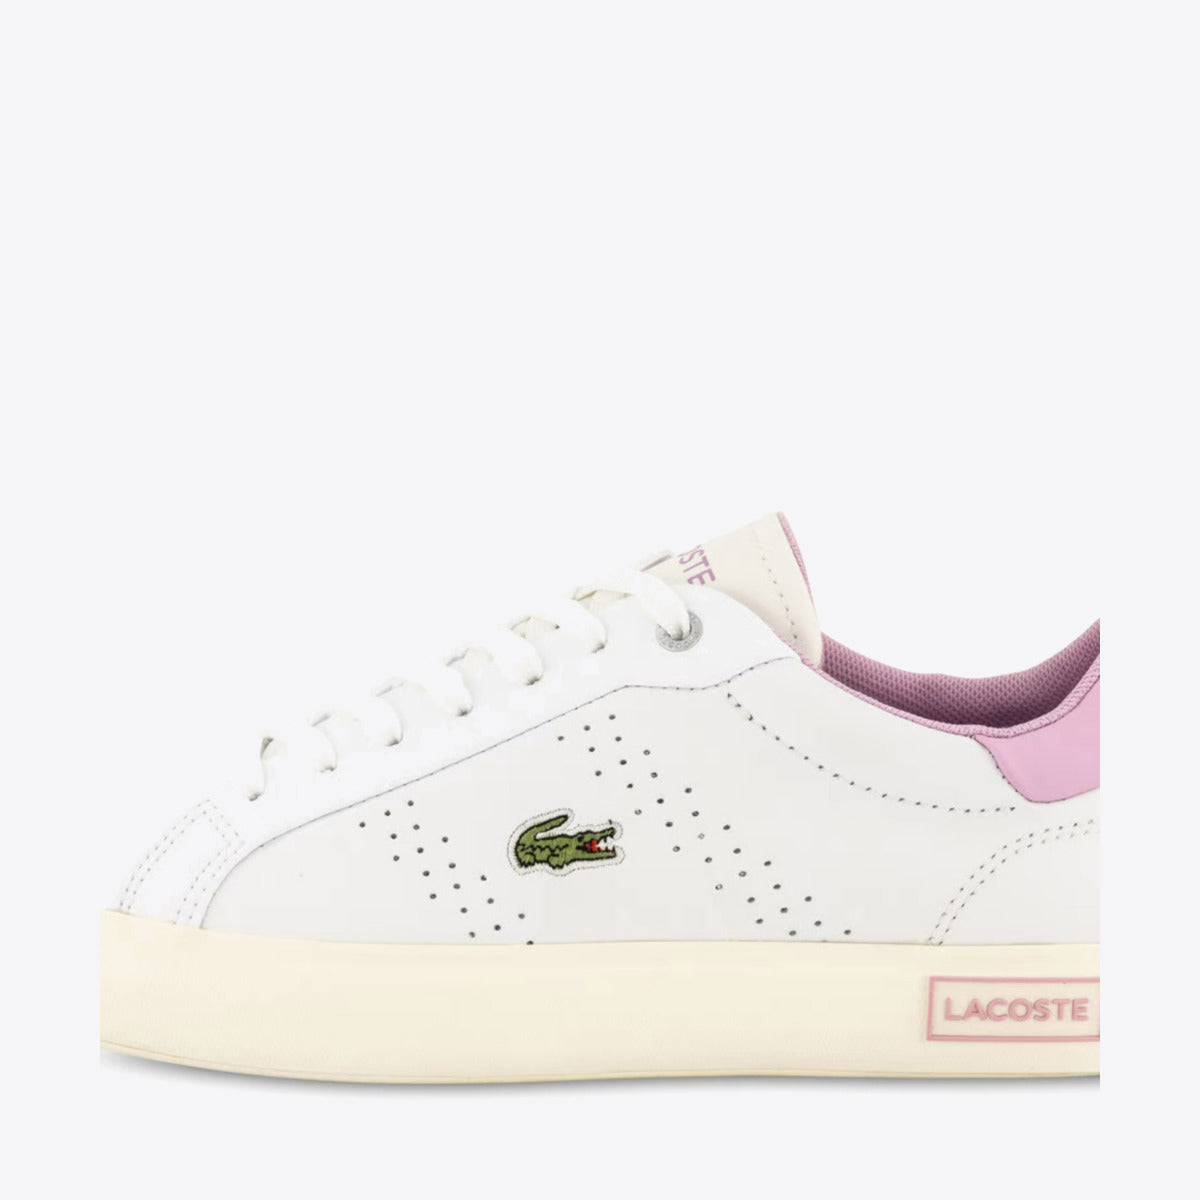 LACOSTE Powercourt 2.0 White/Pink - Image 5